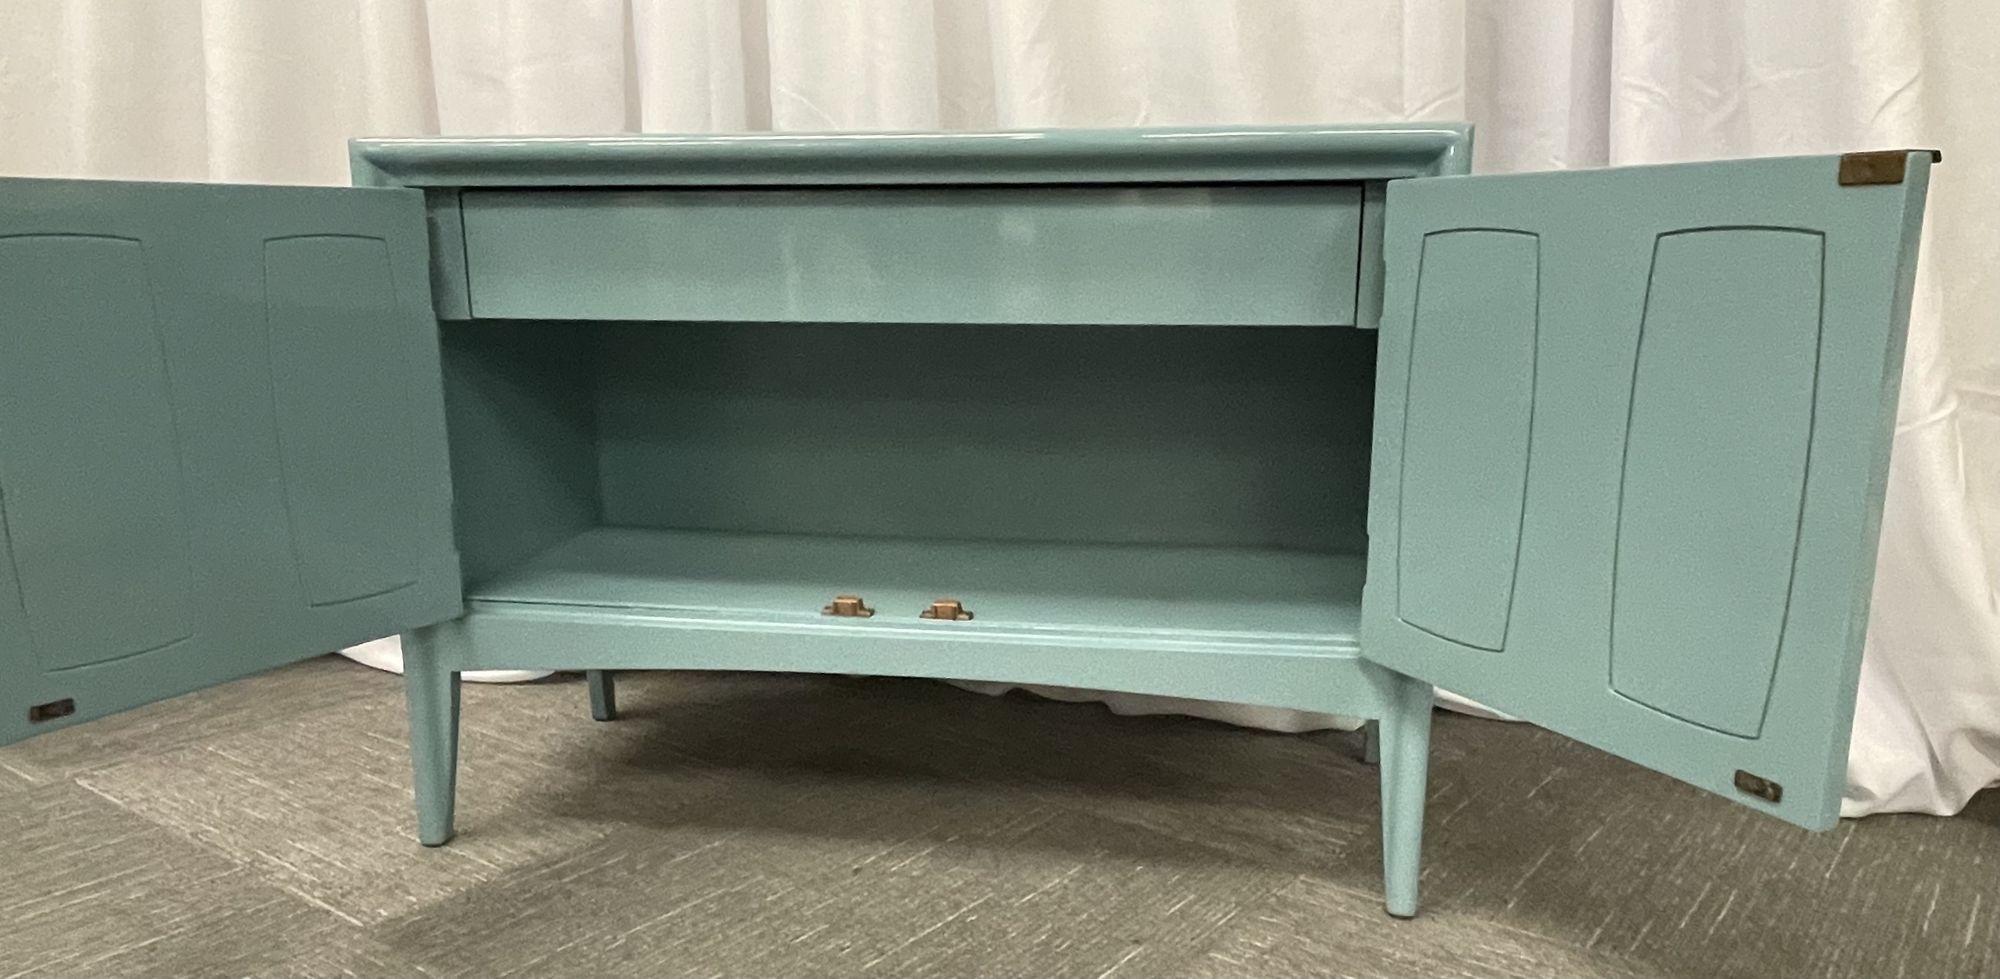 20th Century Mid-Century Modern Chest, Nightstand or Table, Robins Egg Blue